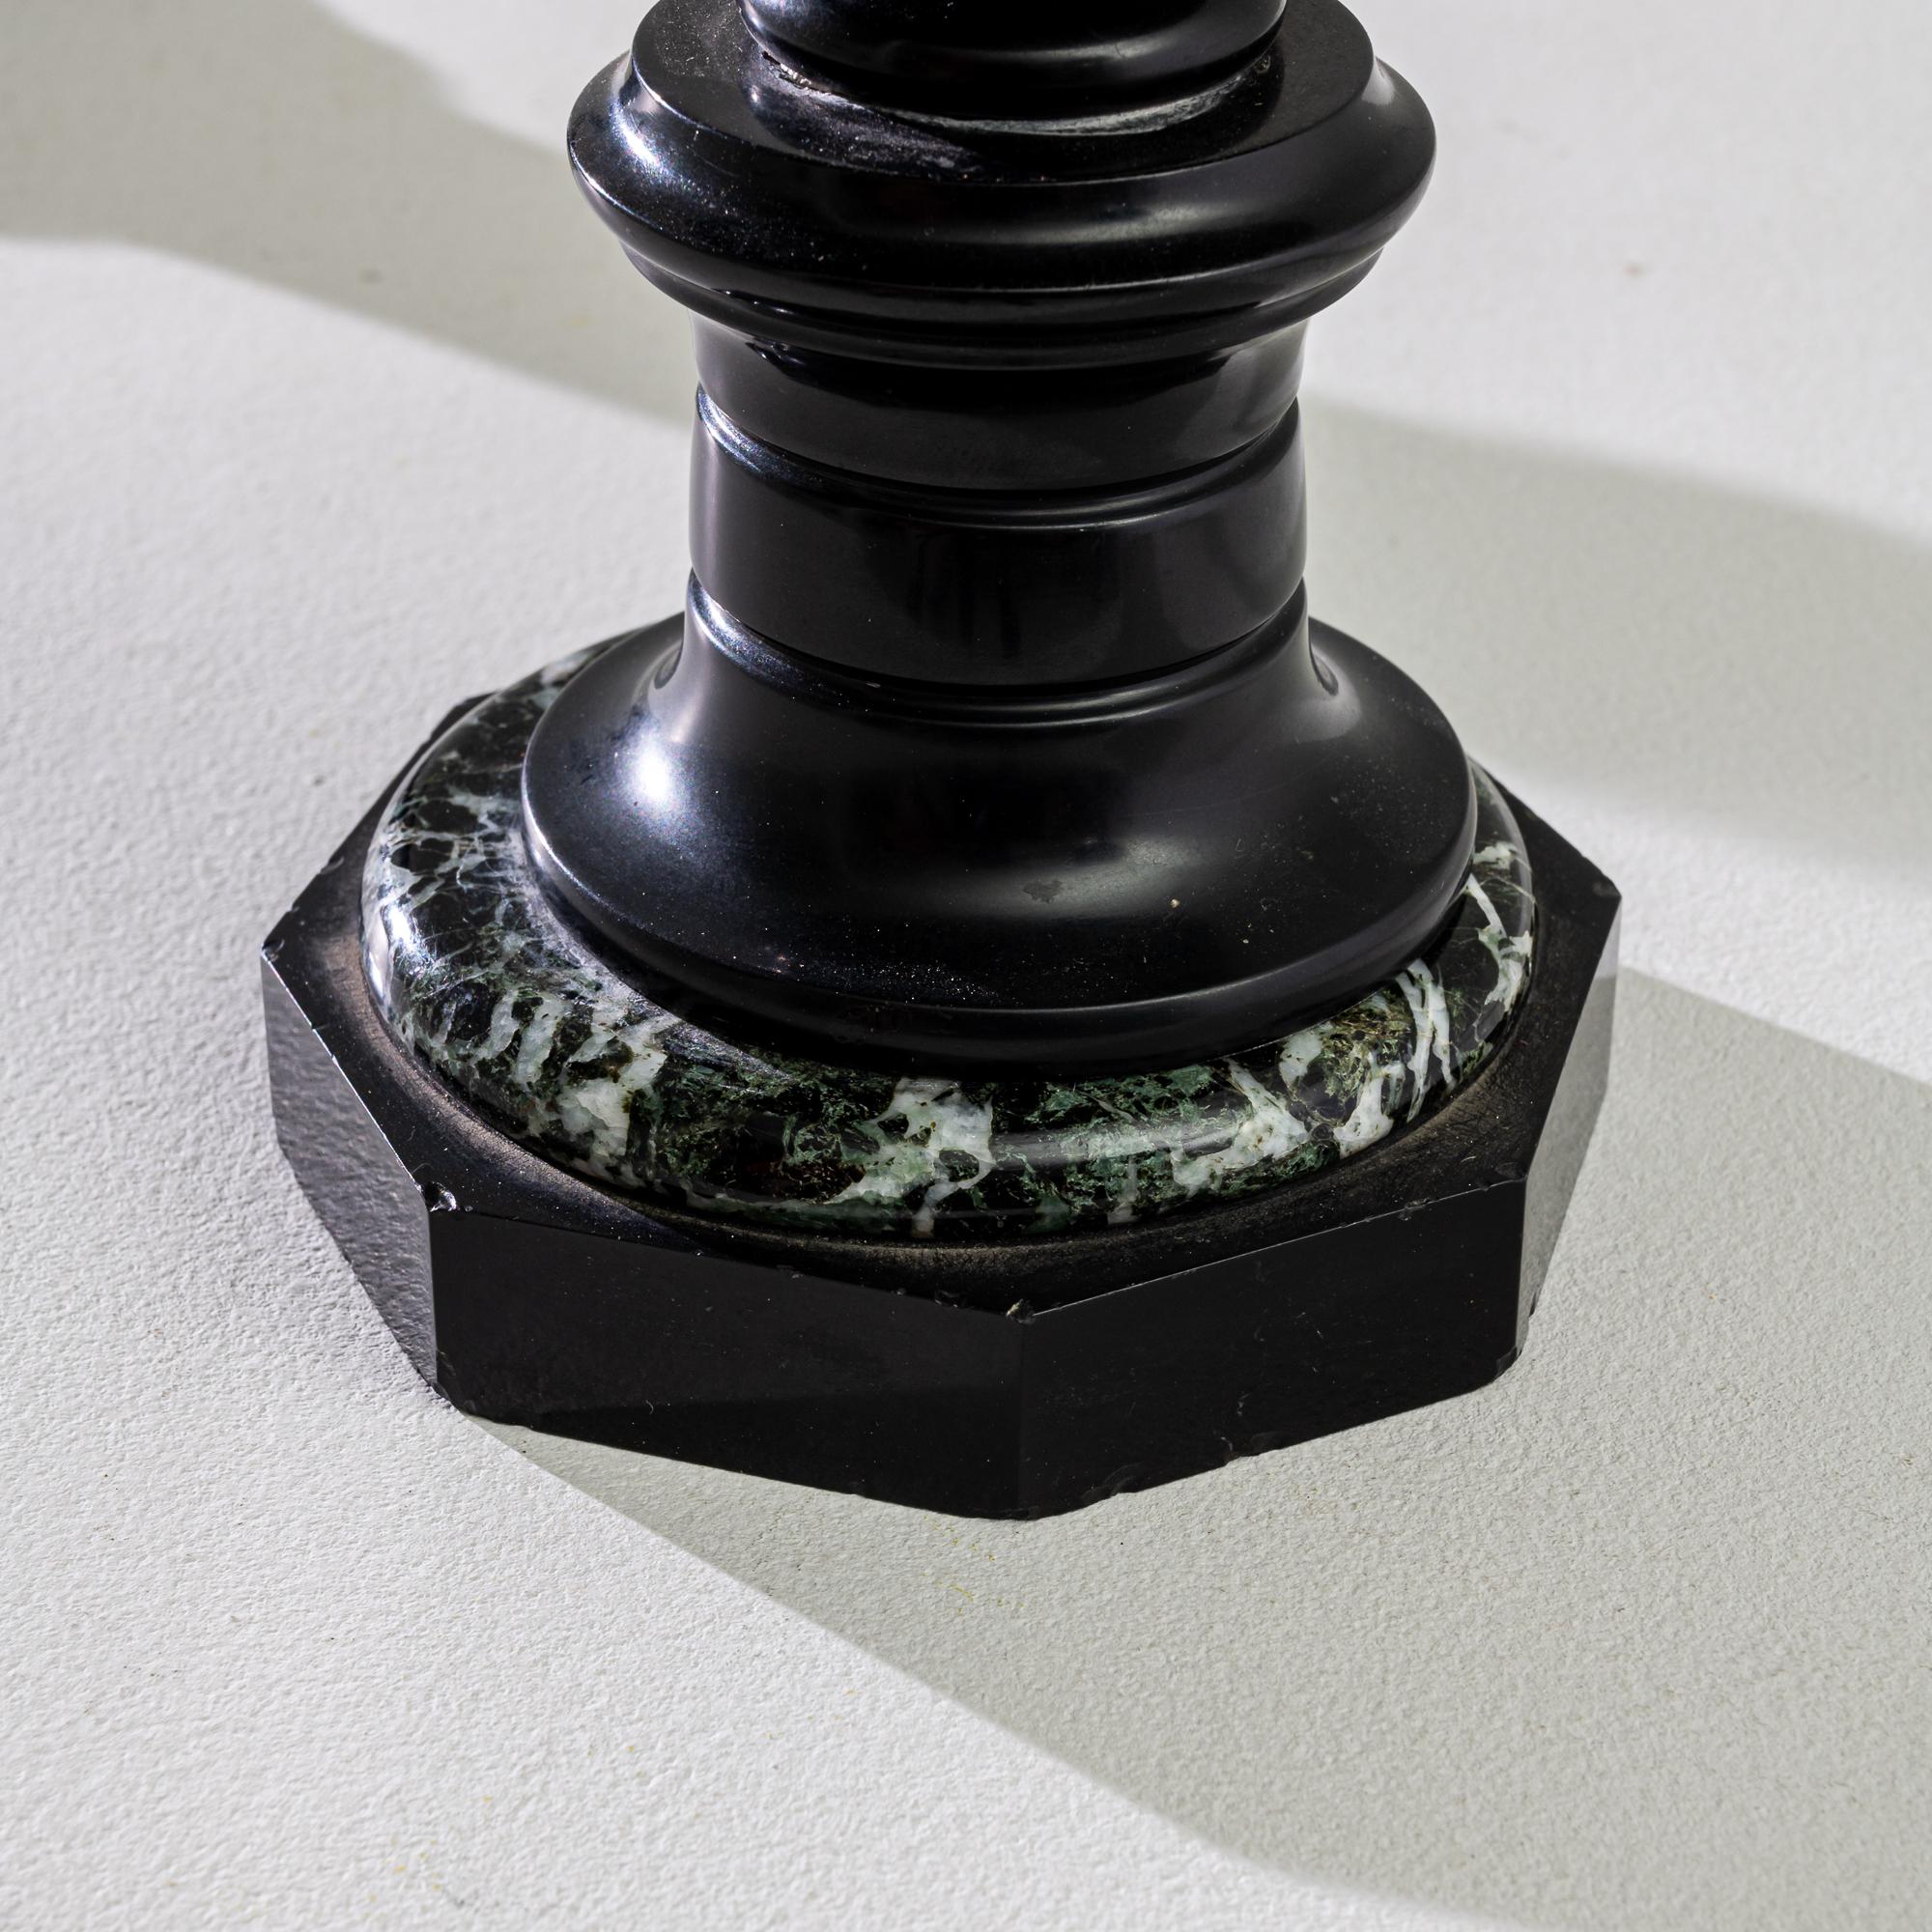 Transform your space with this set of two 1880s French Marble Candle Holders, showcasing an exquisite blend of sophistication and artistry. Crafted from luxurious black marble, these candle holders emanate timeless elegance. The intricate black and